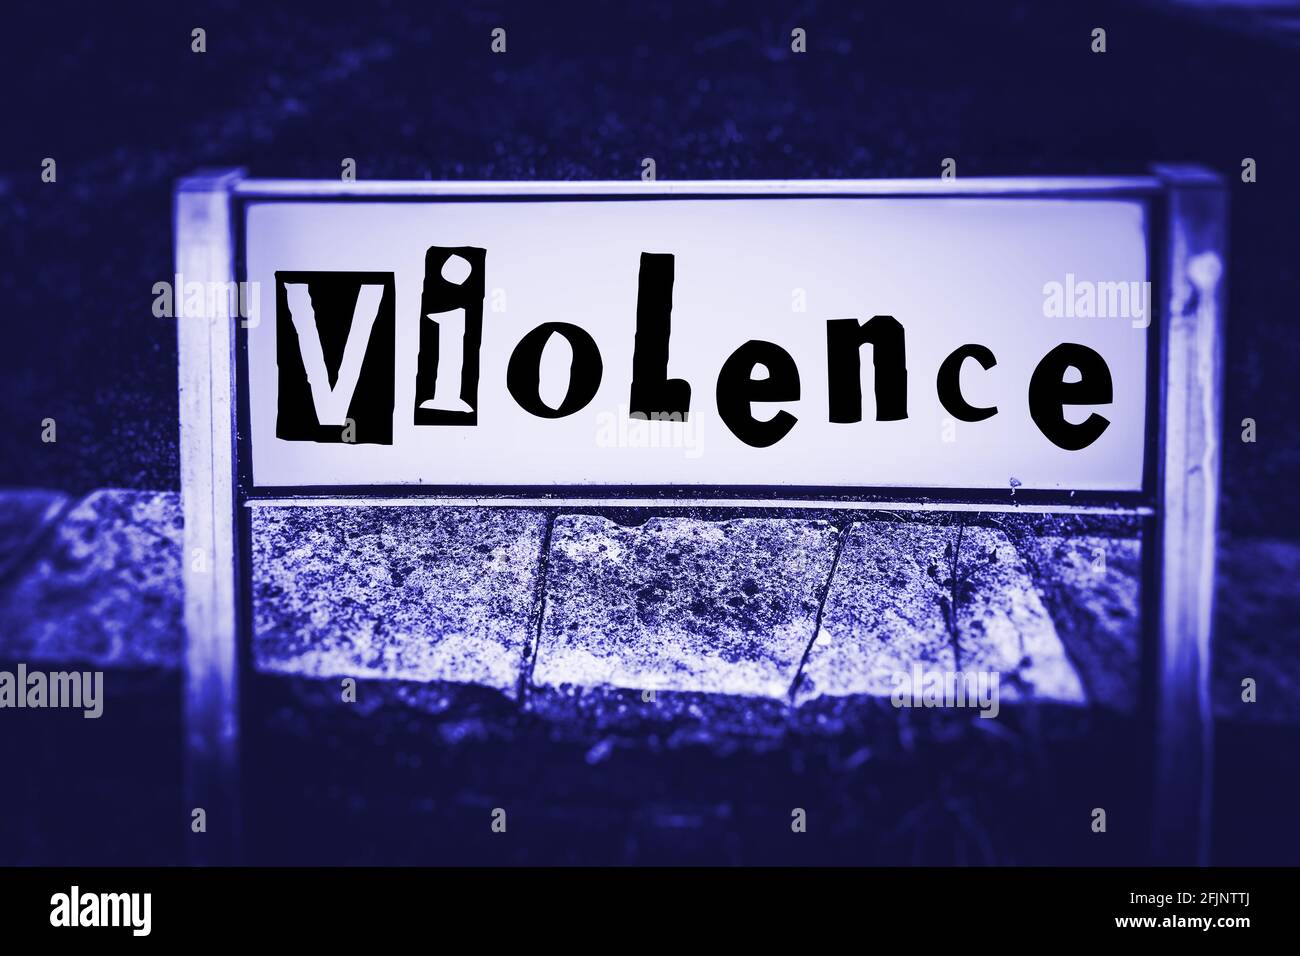 Violence displayed on Signage in blue tone Stock Photo